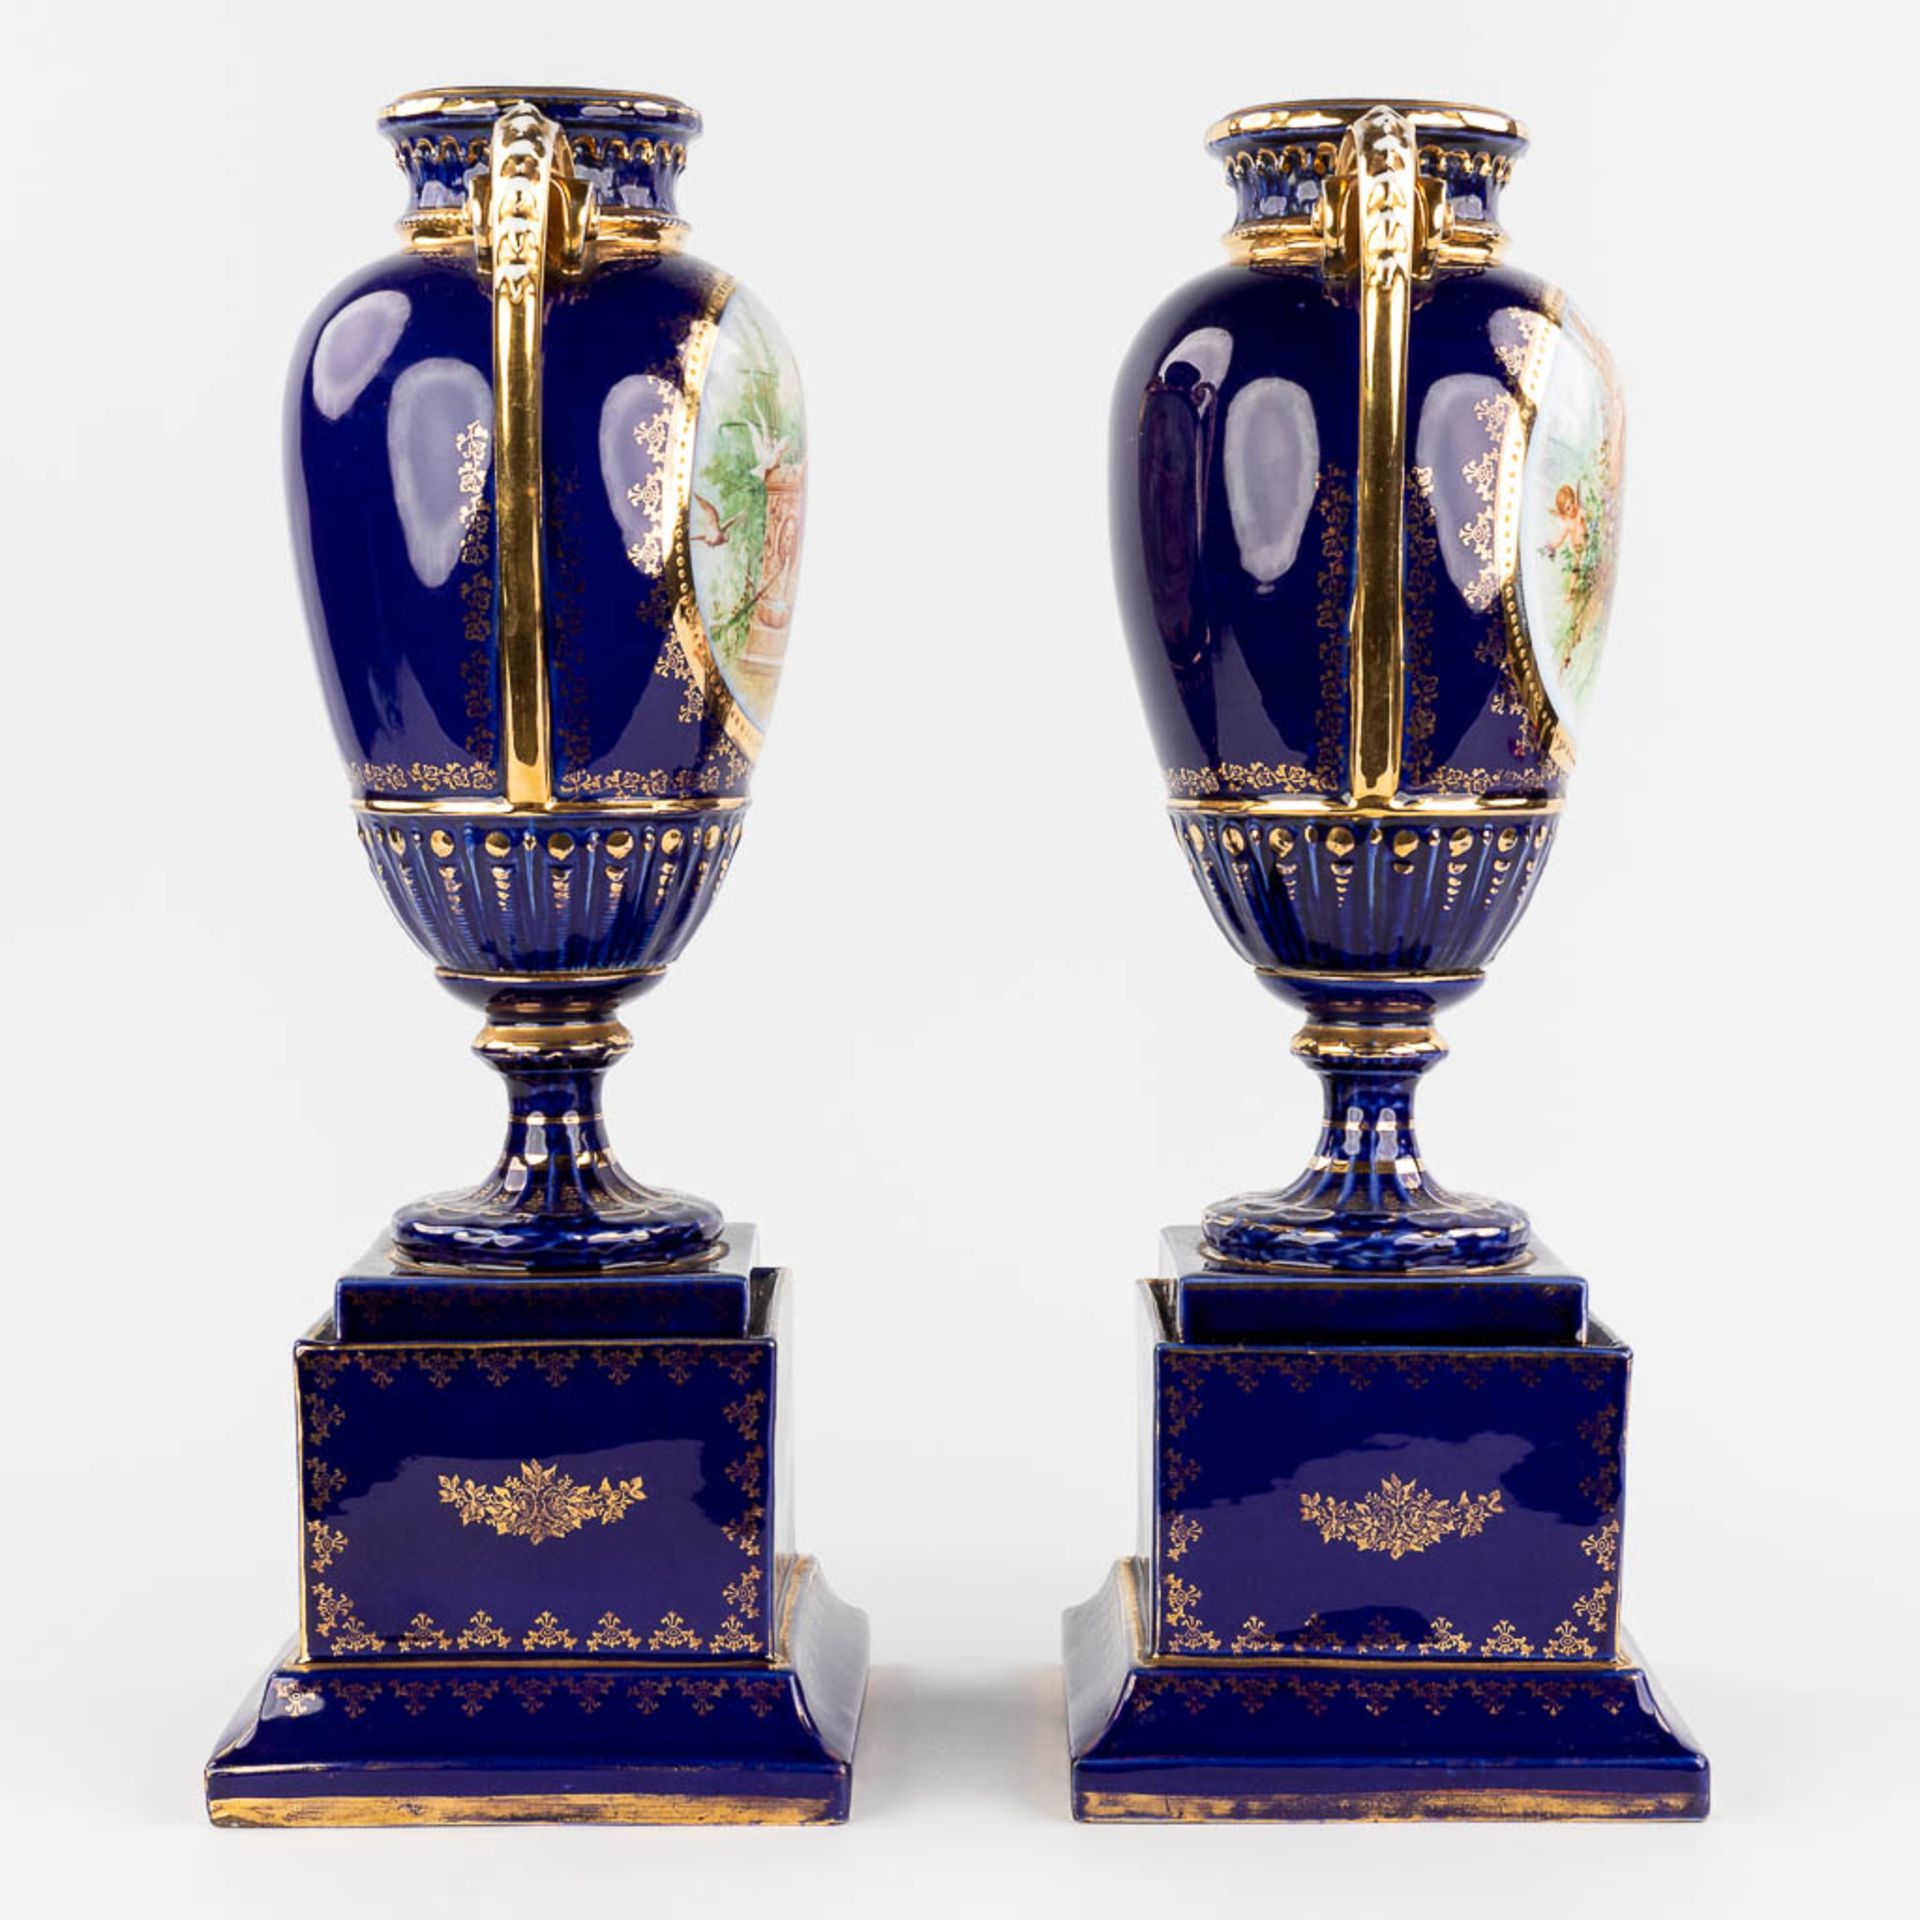 A pair of vases, with a transferprint decor. 20th C. (L: 18 x W: 18 x H: 50 cm) - Image 4 of 12